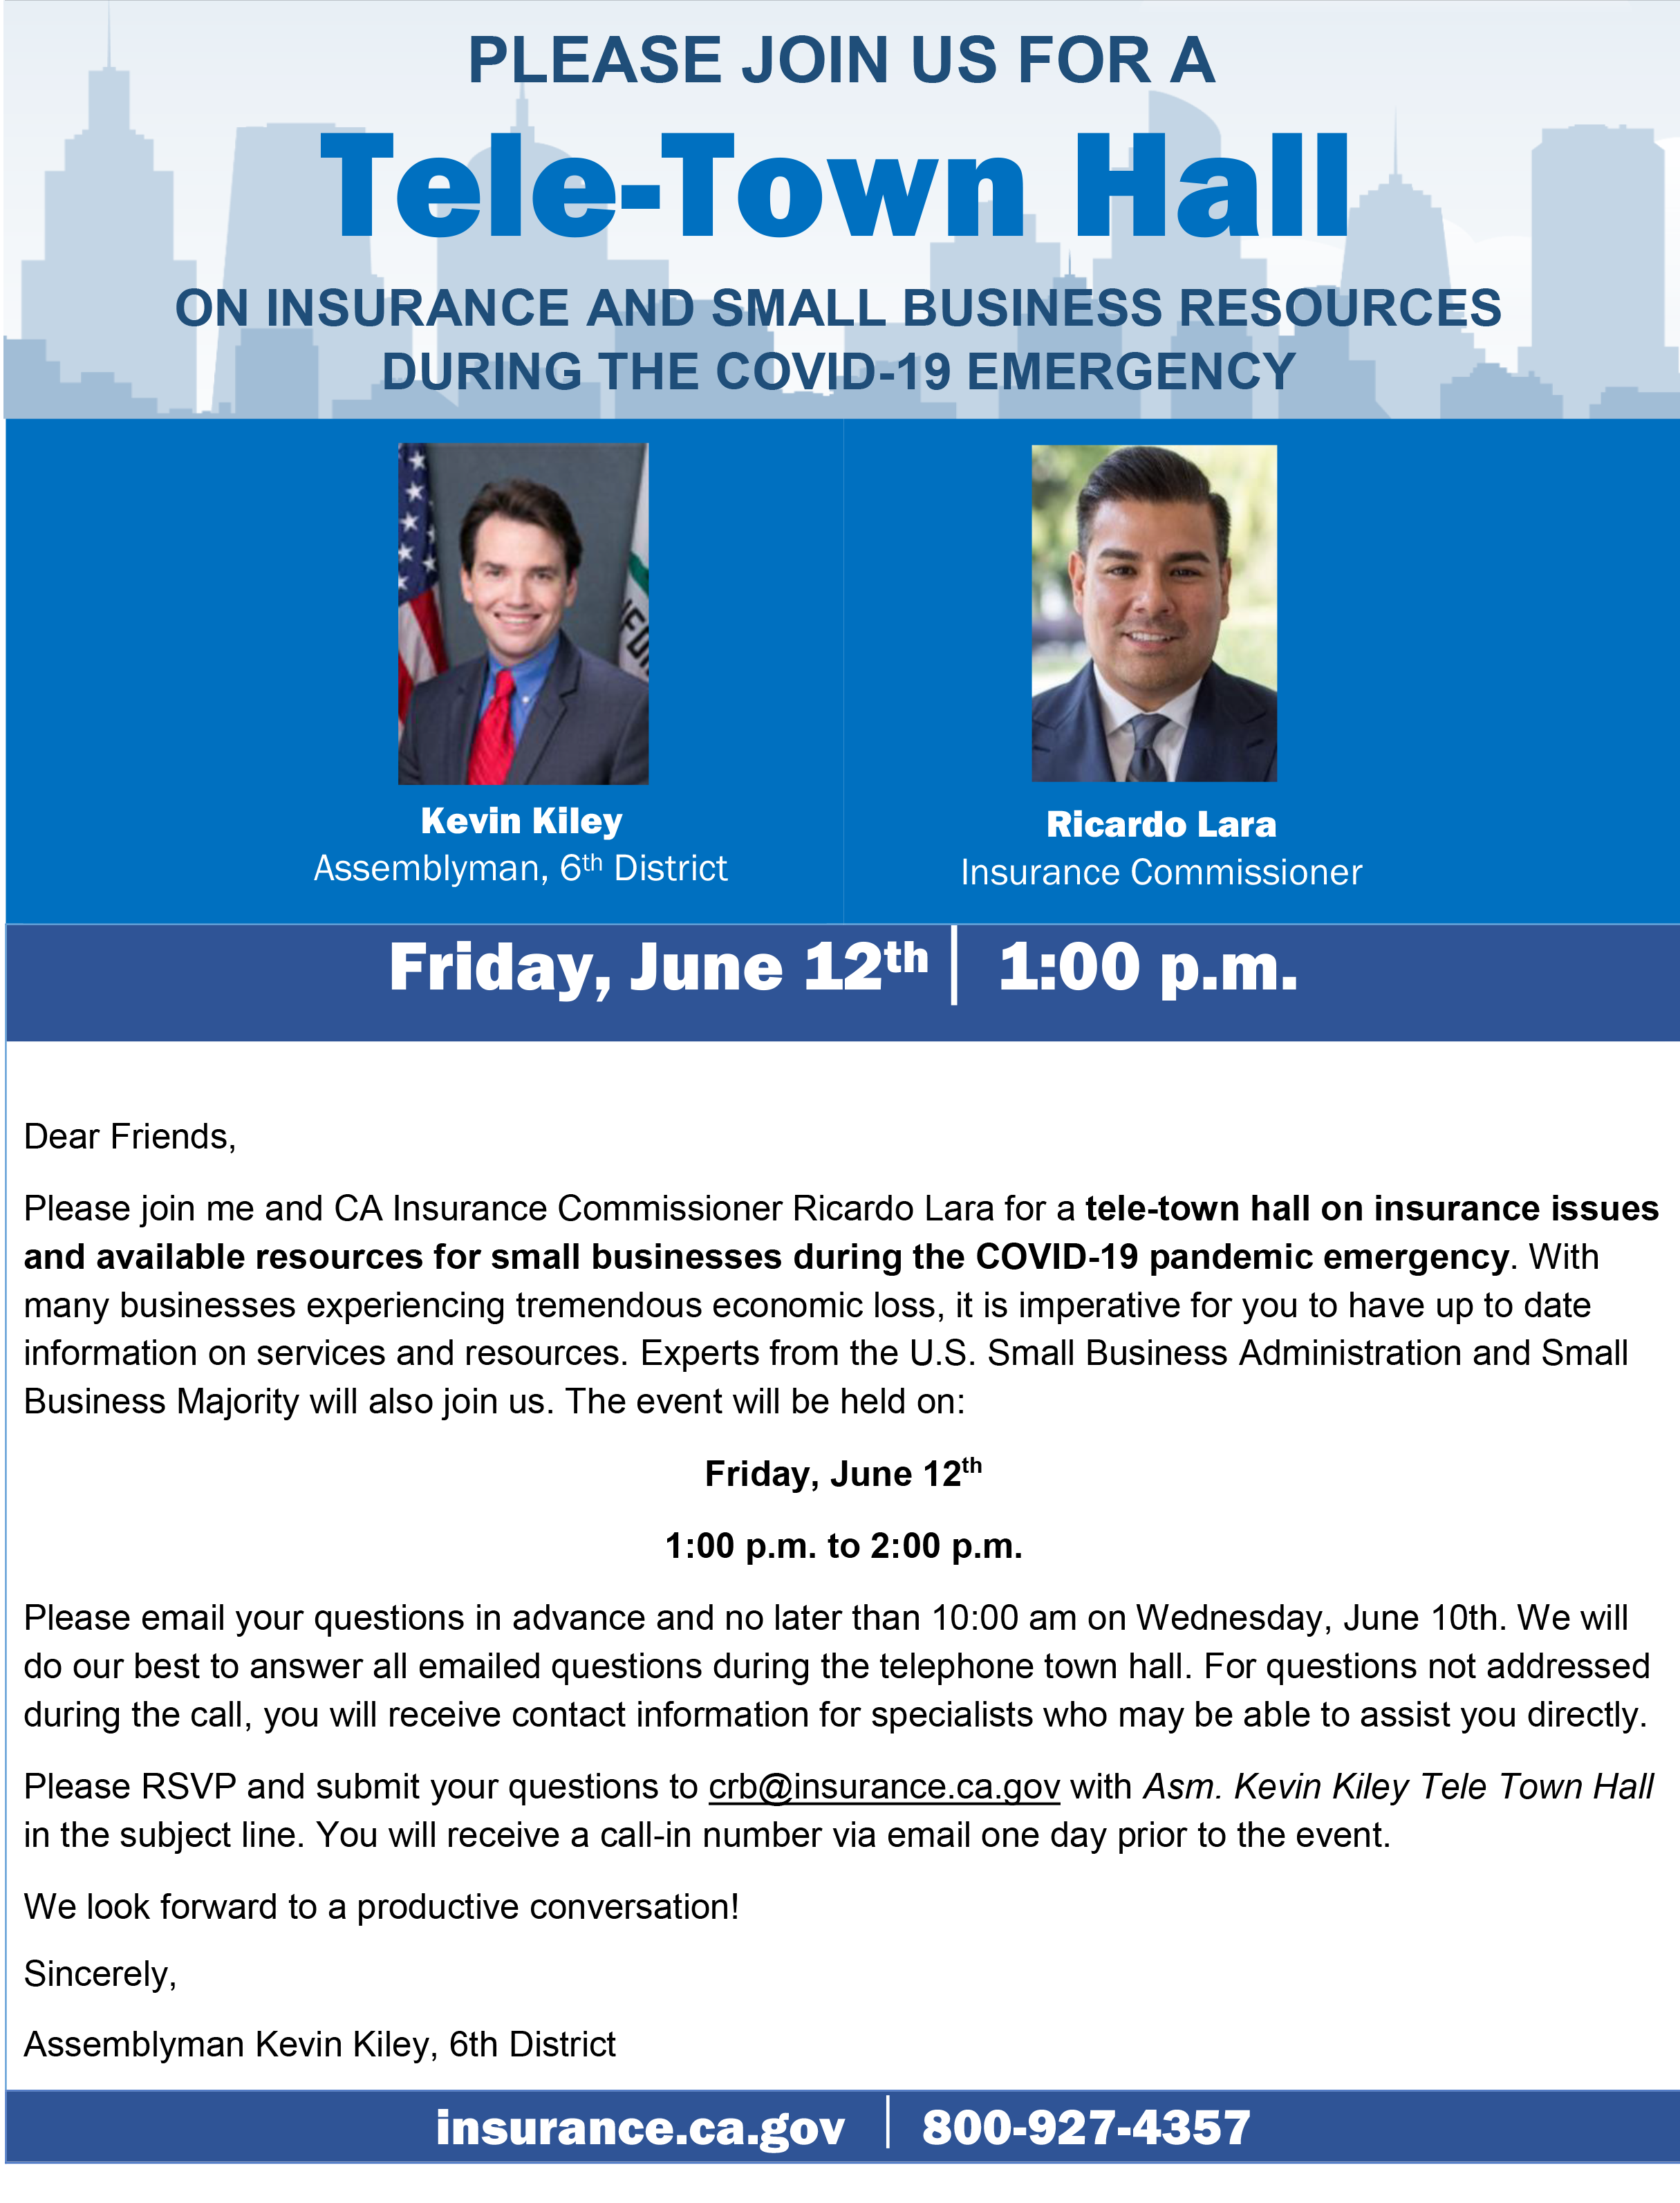 Please join us for a tele townhall on insurance and small buinsess resources during the covid19 emergency. Friday, June 12th at 1pm. Please email your questions by 10am June 10th to crb@insurance.ca.gov and you will